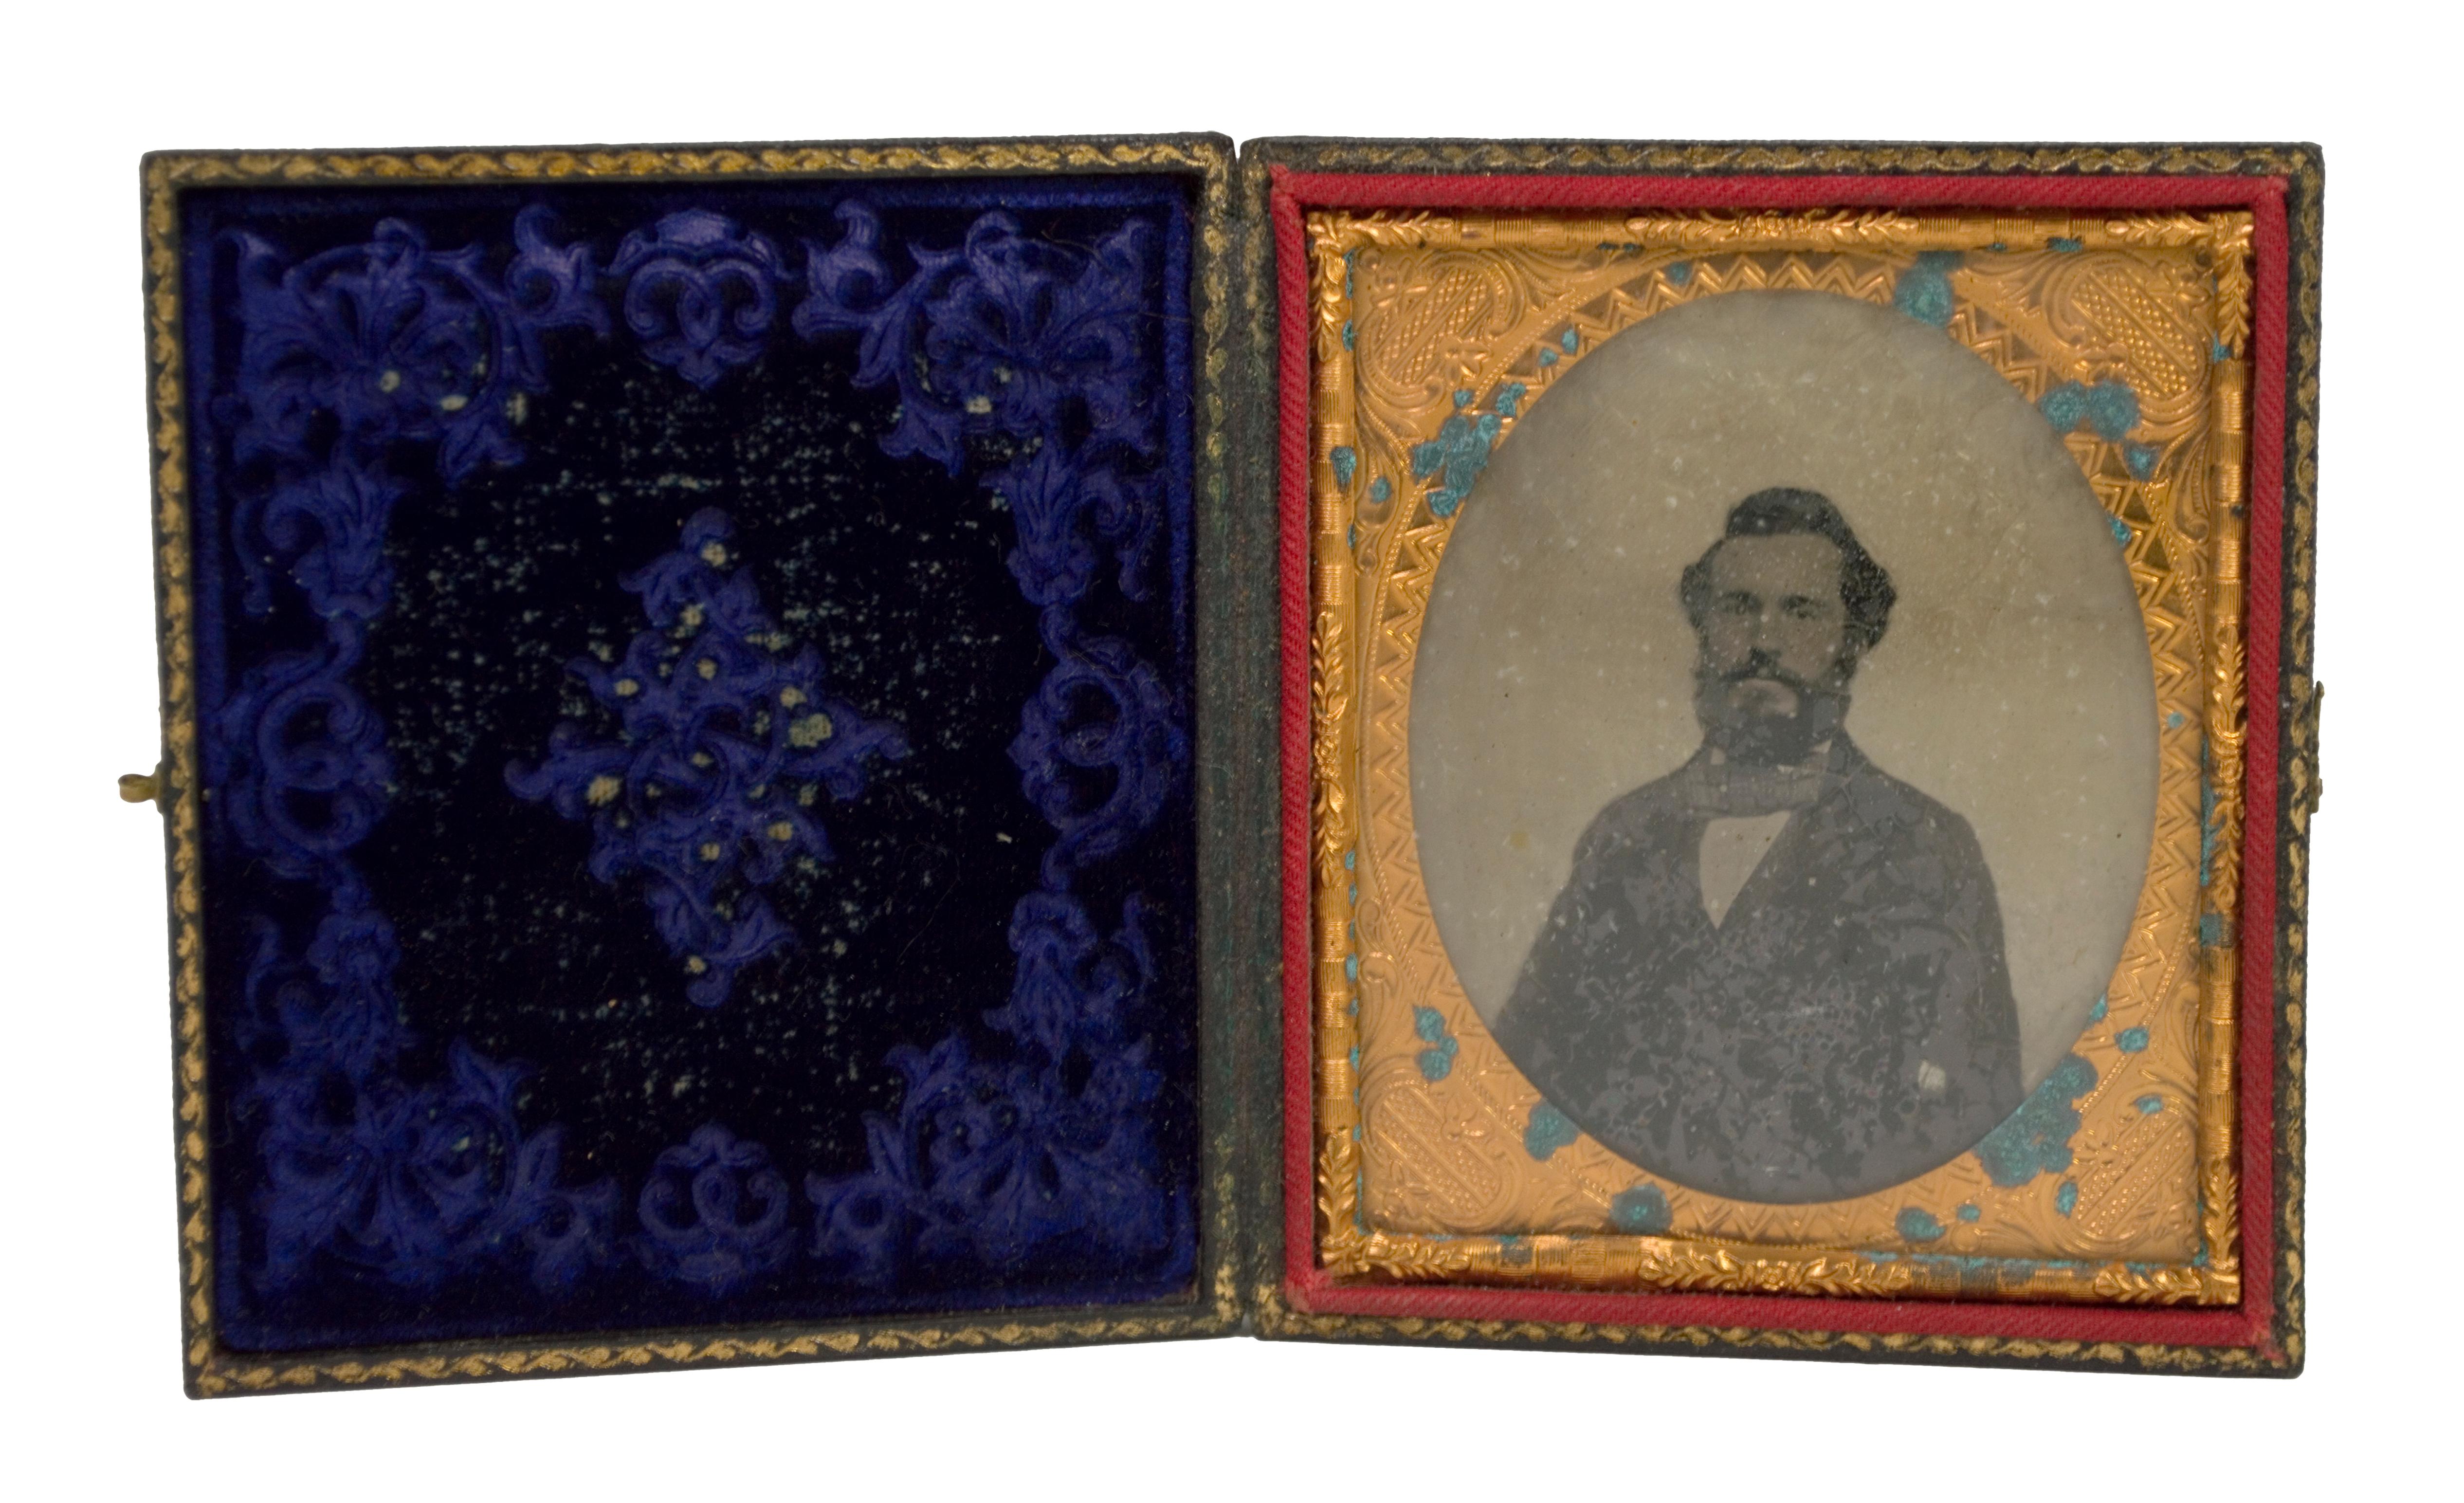 Unknown Portrait Photograph - Ambrotype of a Gentleman in a Suit in Case, Civil War Period 1860s